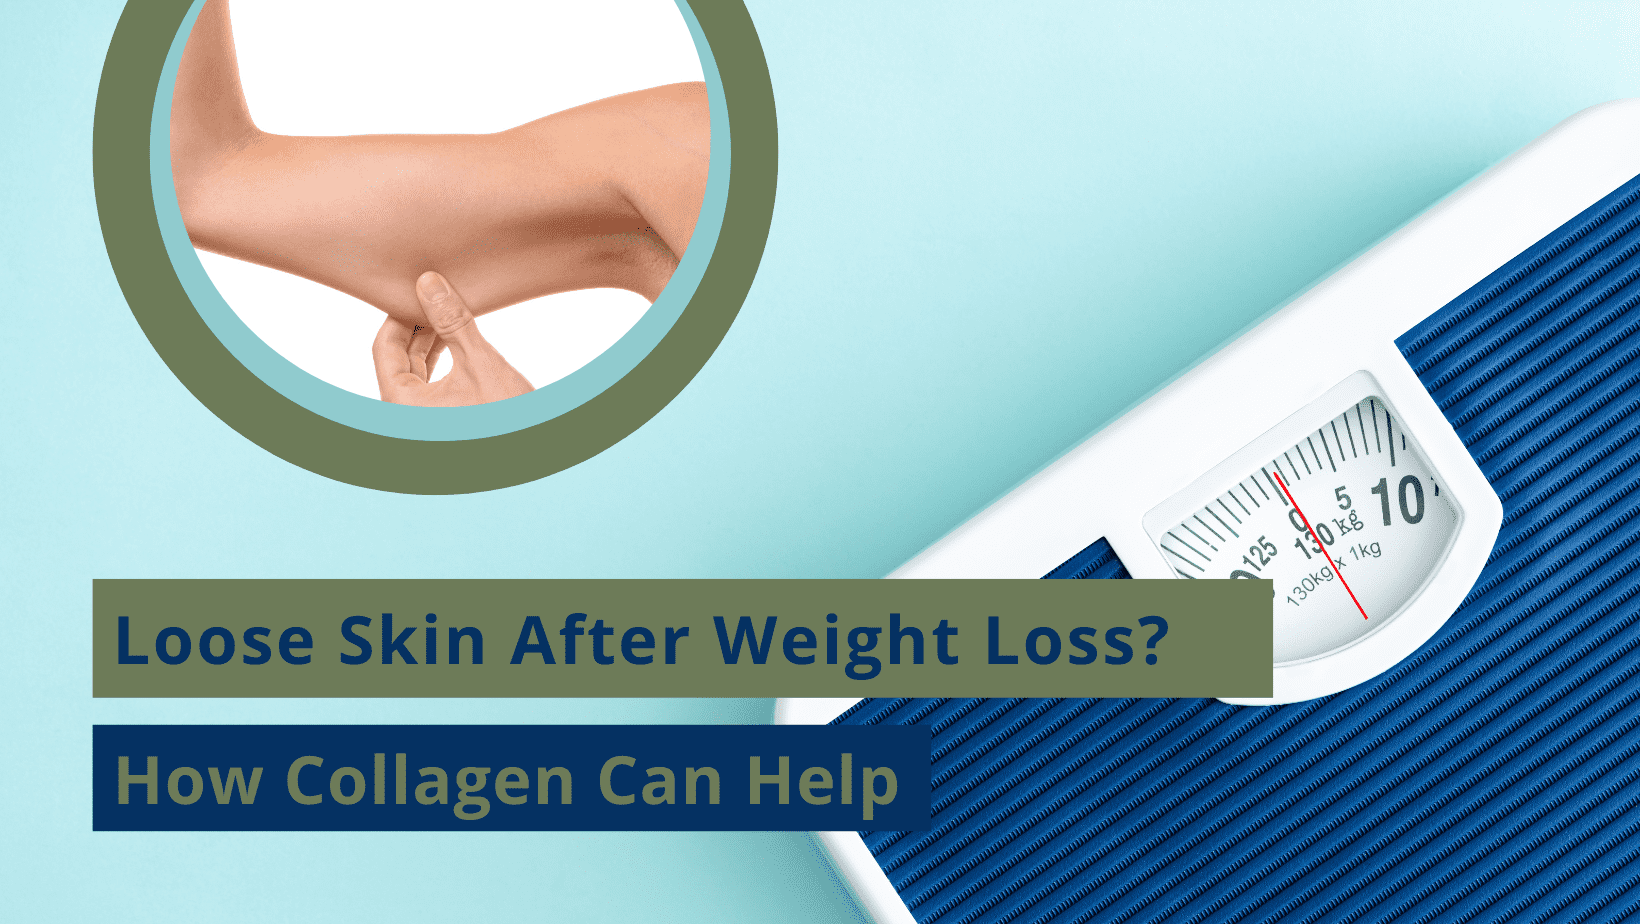 collagen for loose skin after weight loss